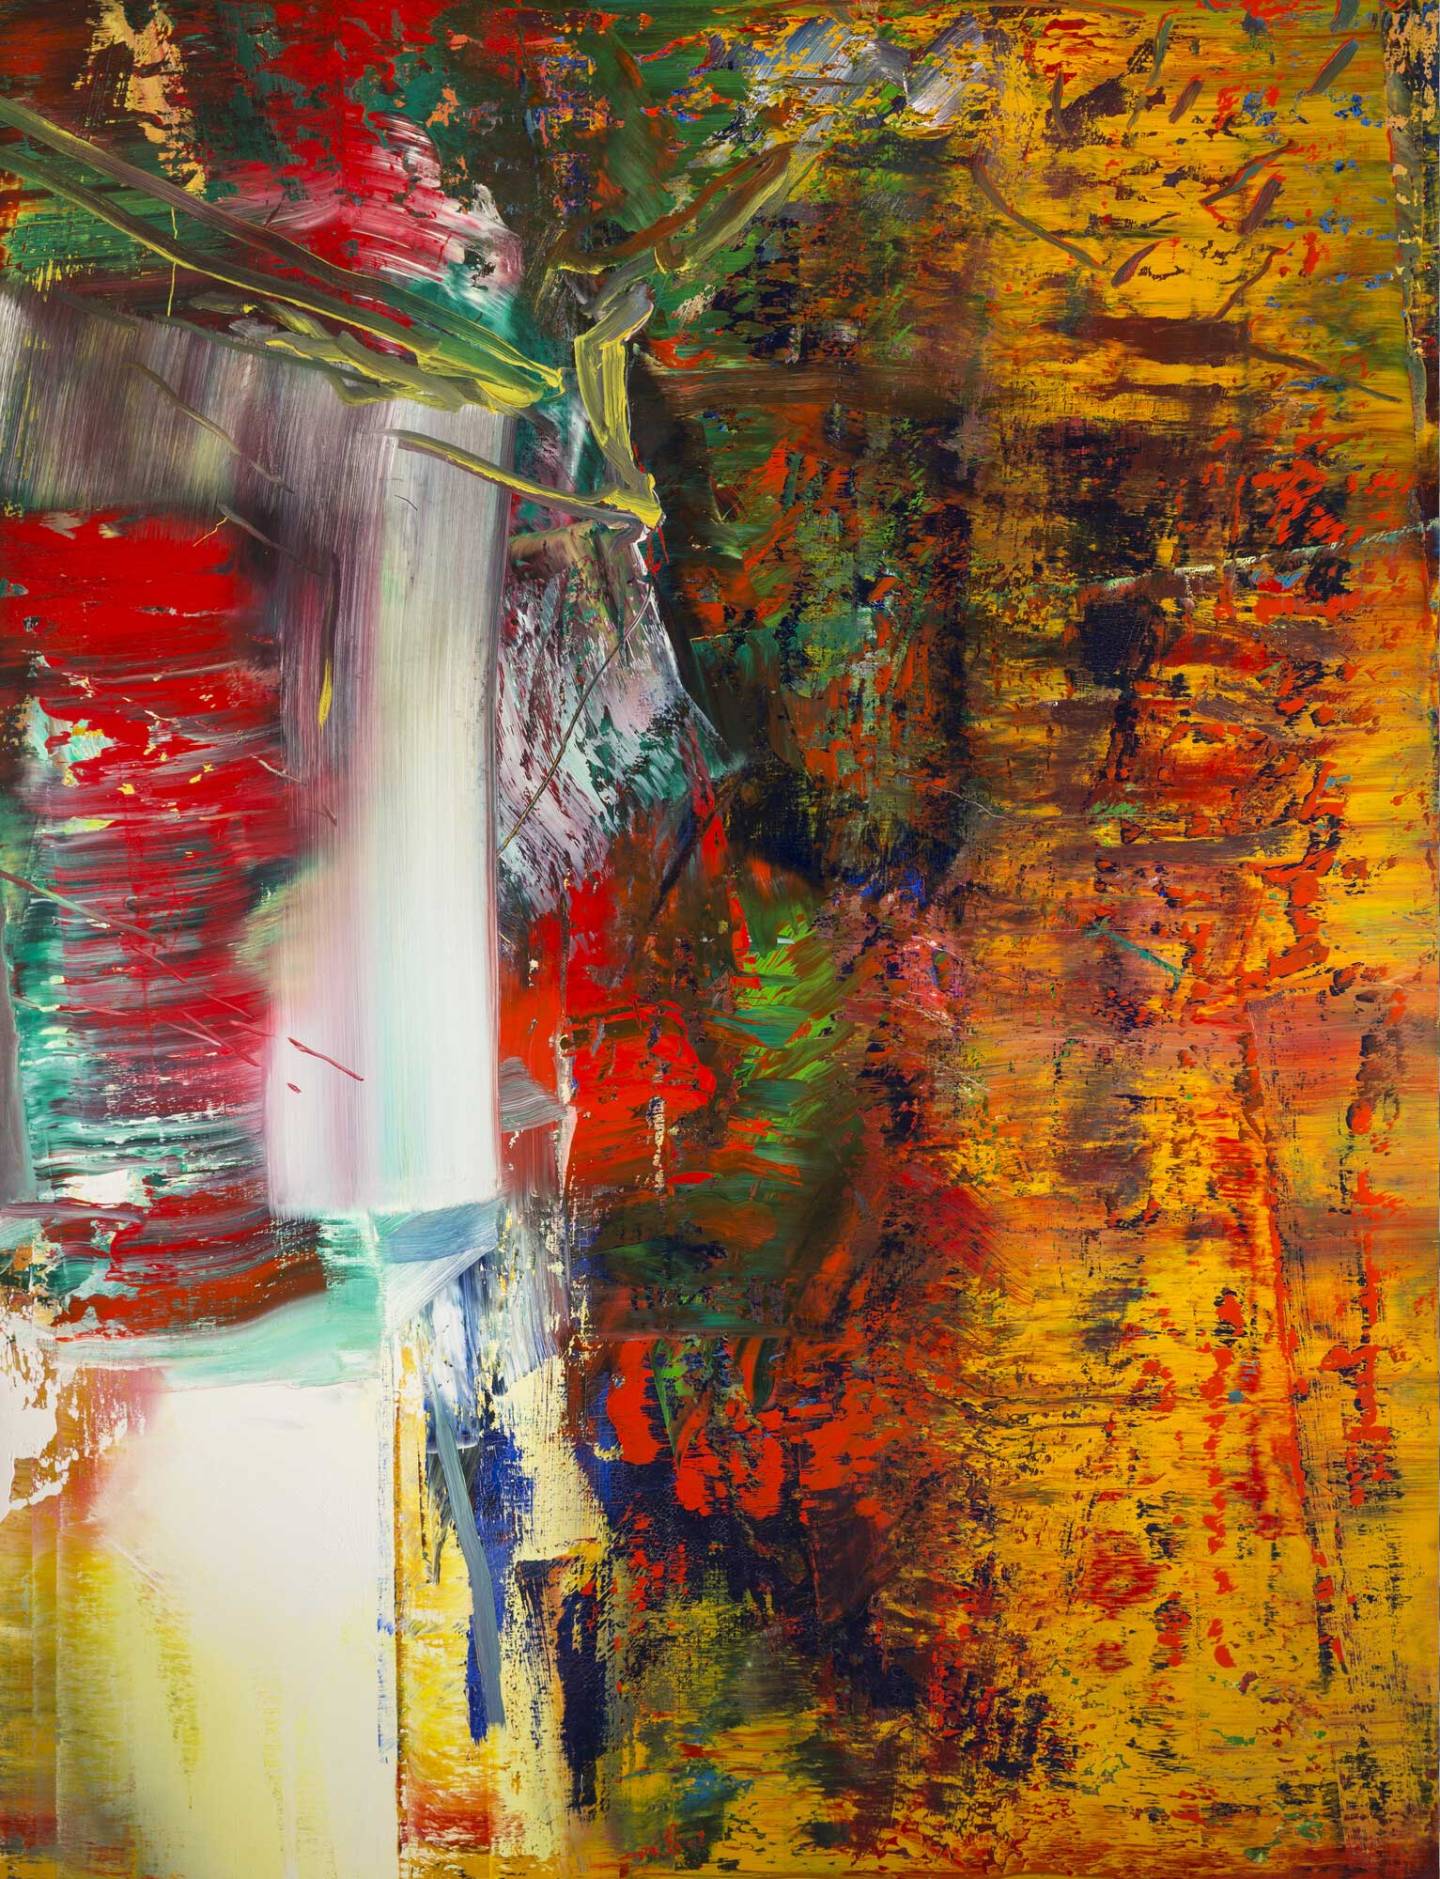 An untitled 1986 abstract painting by Gerhard Richter